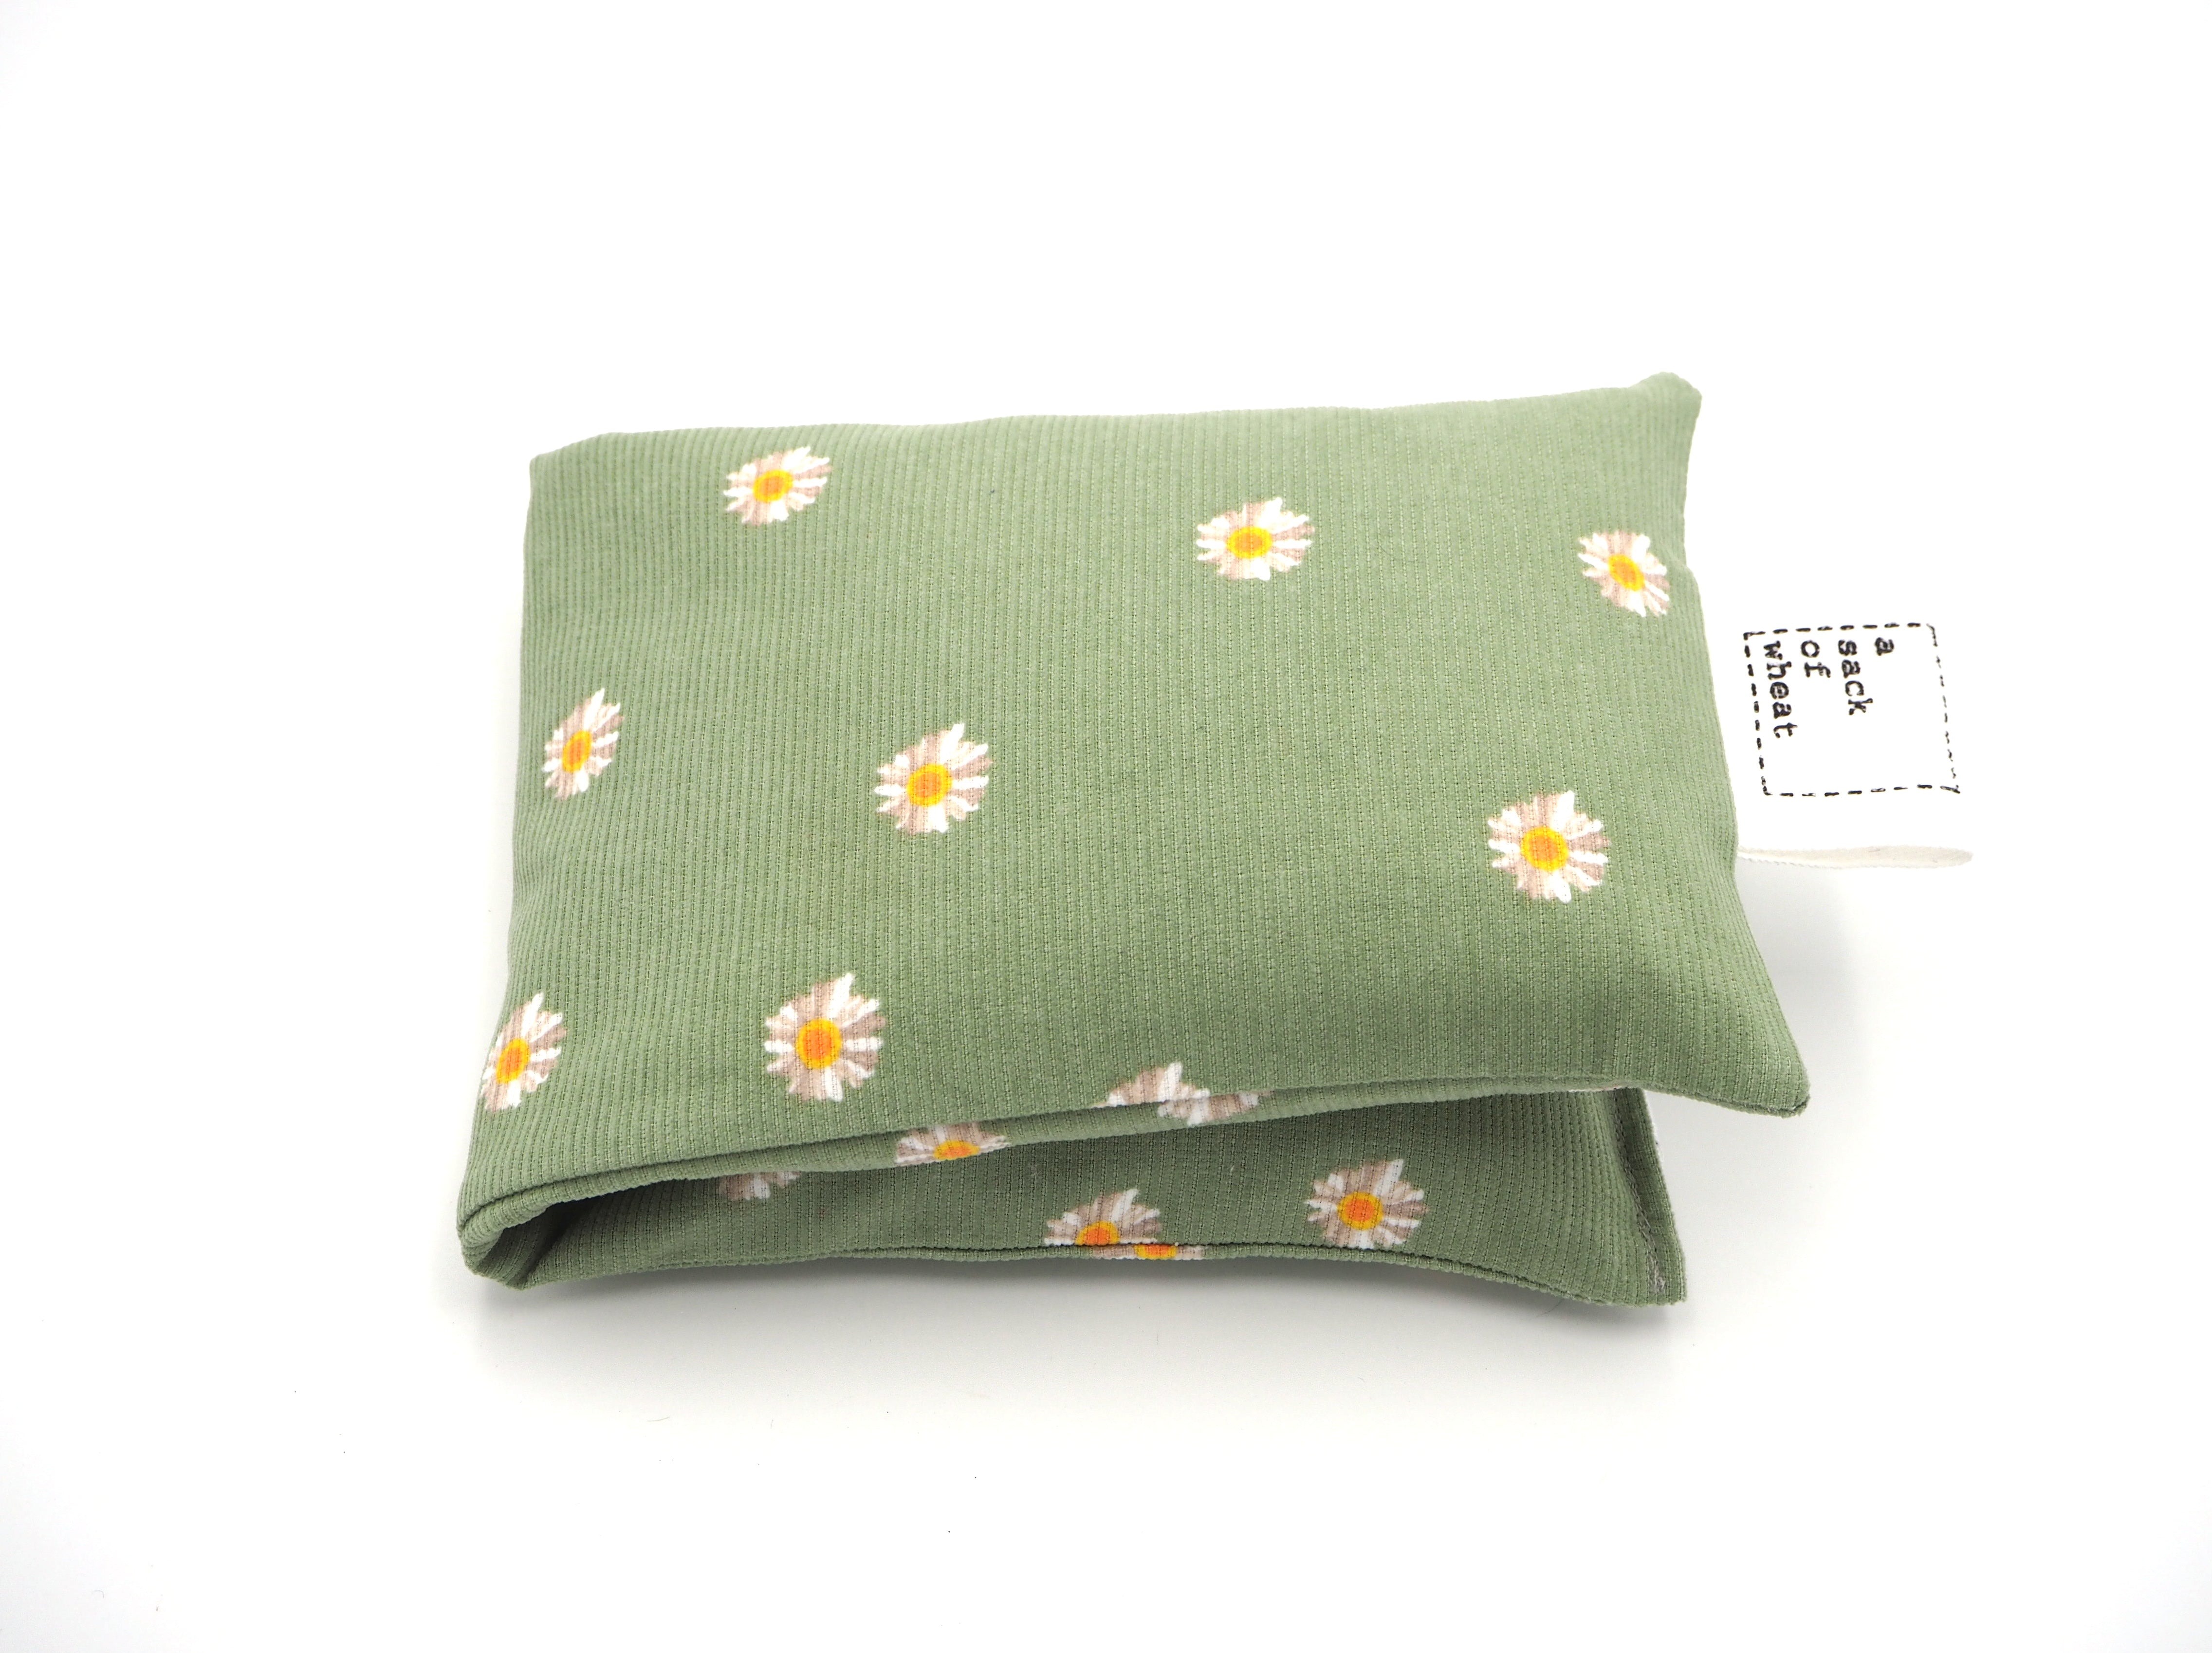 Folded Sack Of Wheat Image featuring cute yellow & white daisy's, on soft corduroy 100% cotton fabric